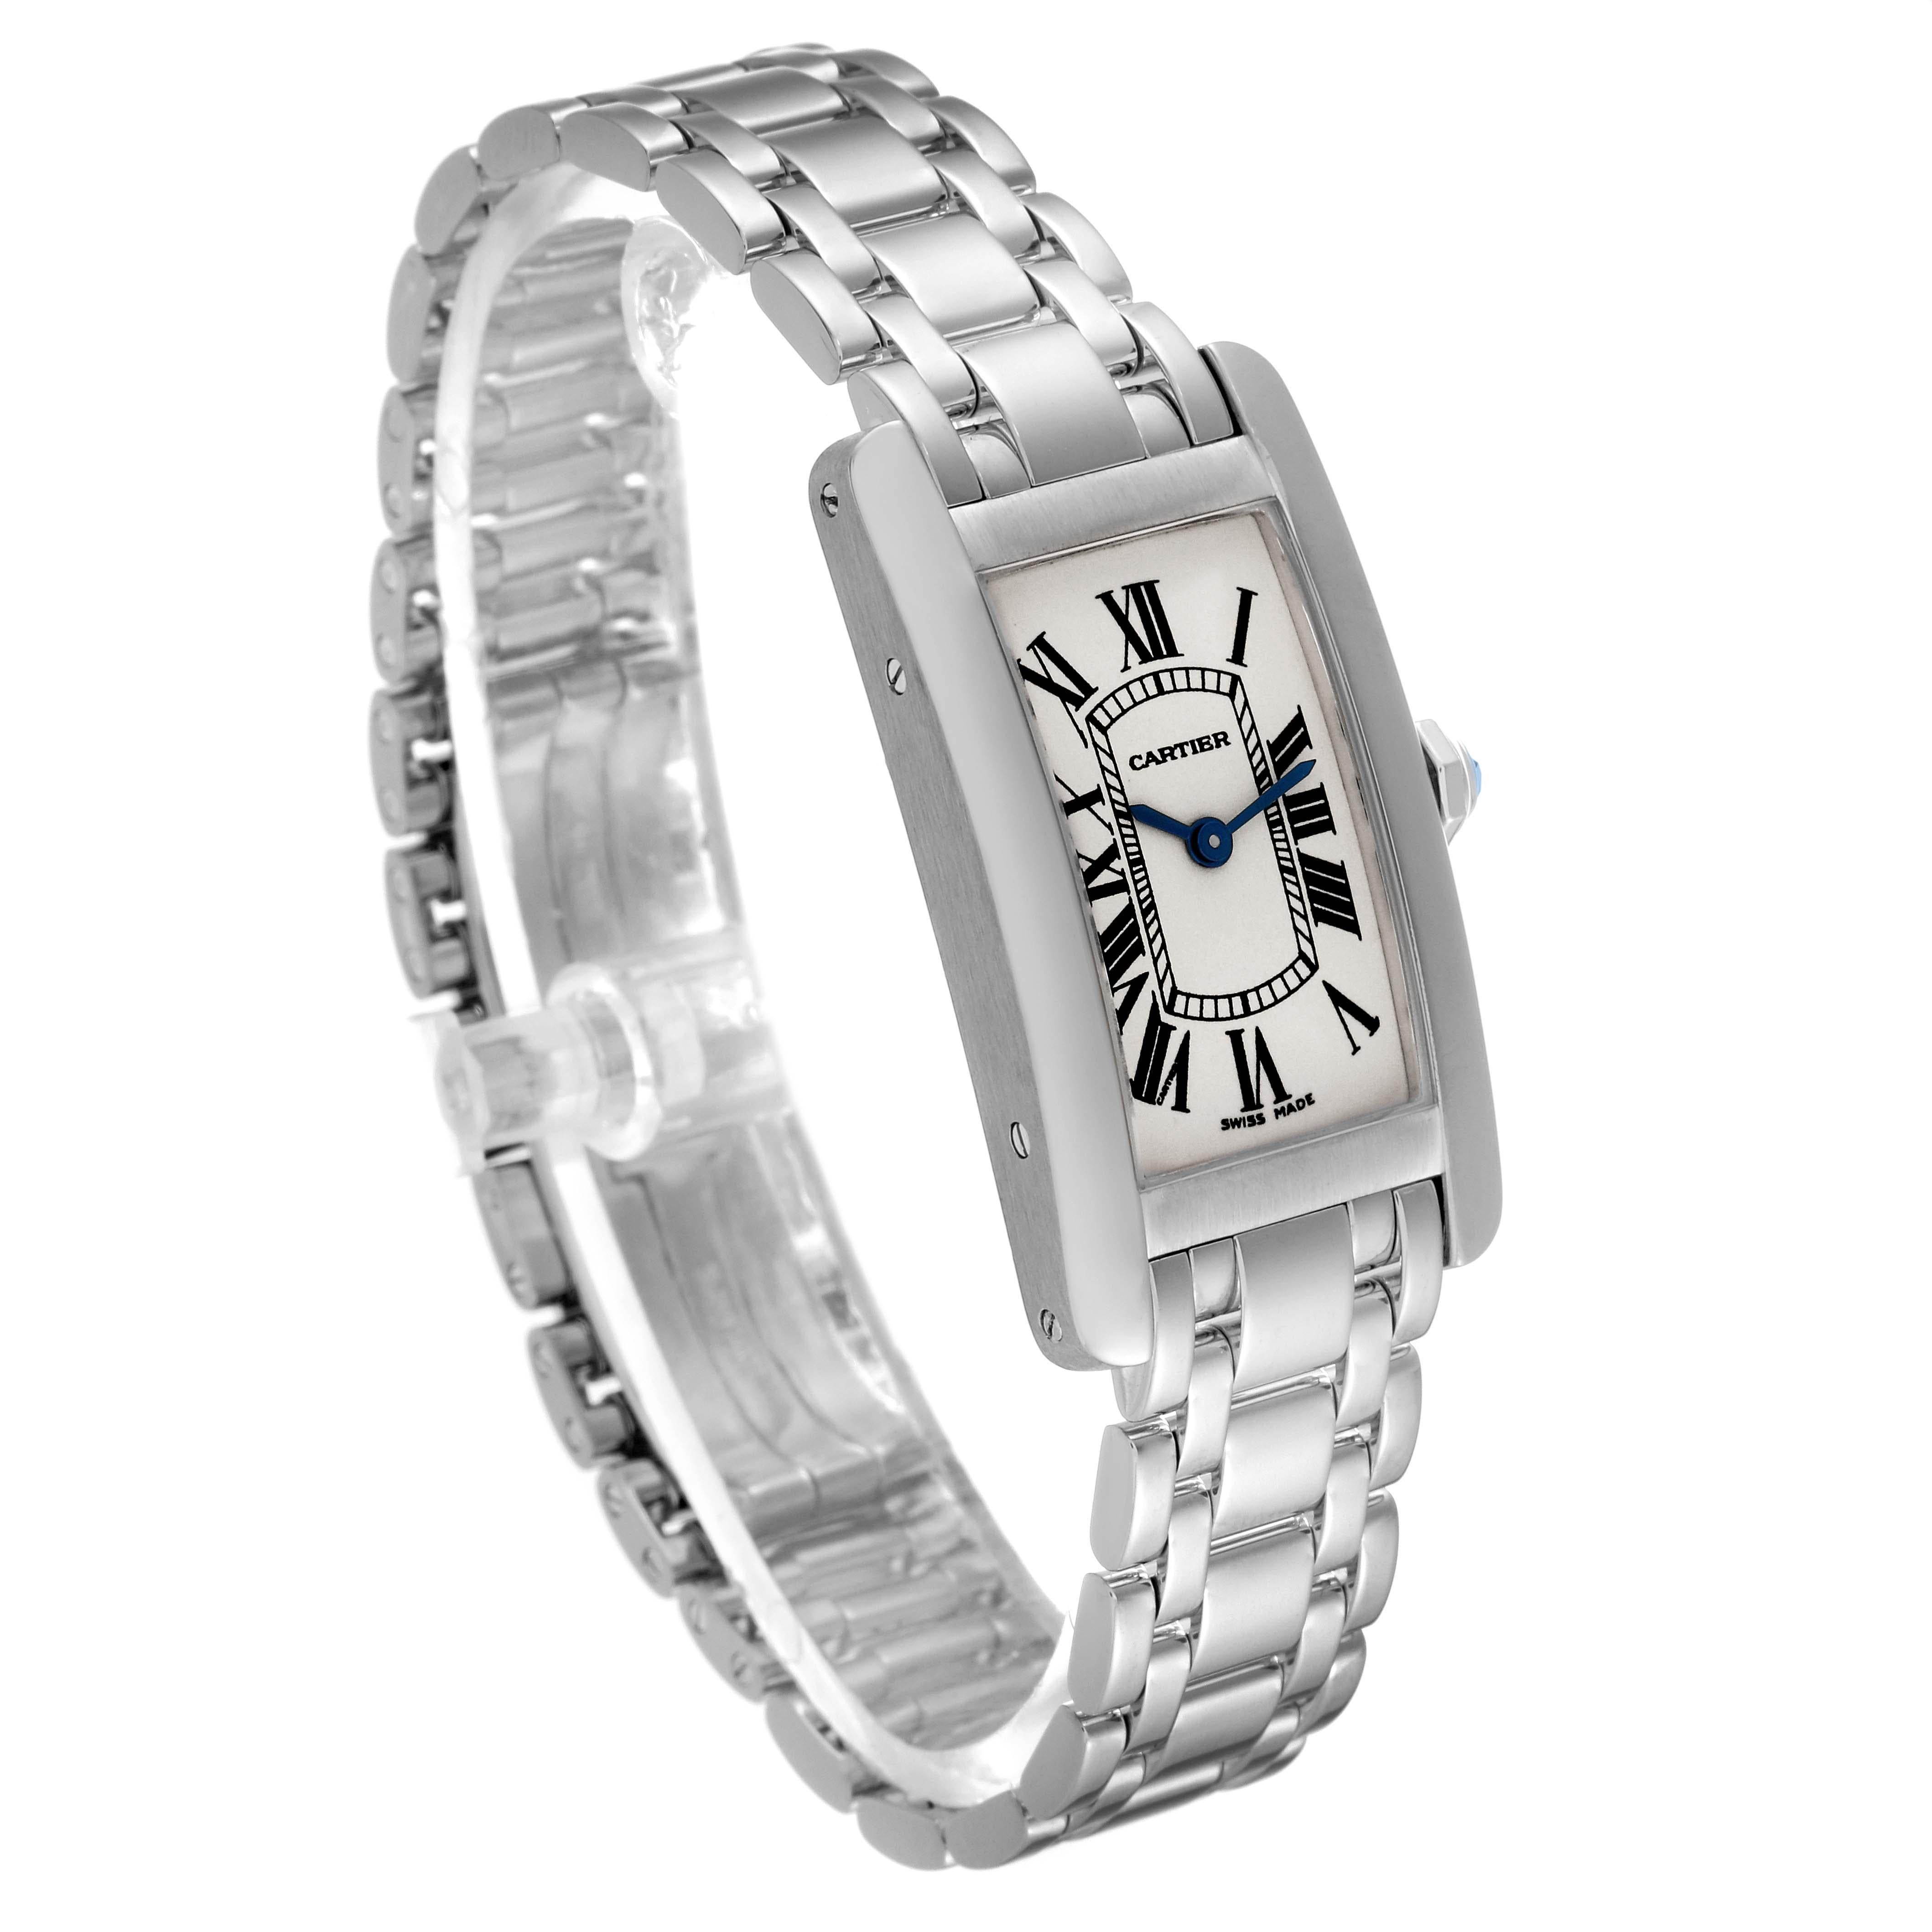 Cartier Tank Americaine Silver Dial White Gold Ladies Watch W26019L1 Box Papers In Excellent Condition For Sale In Atlanta, GA